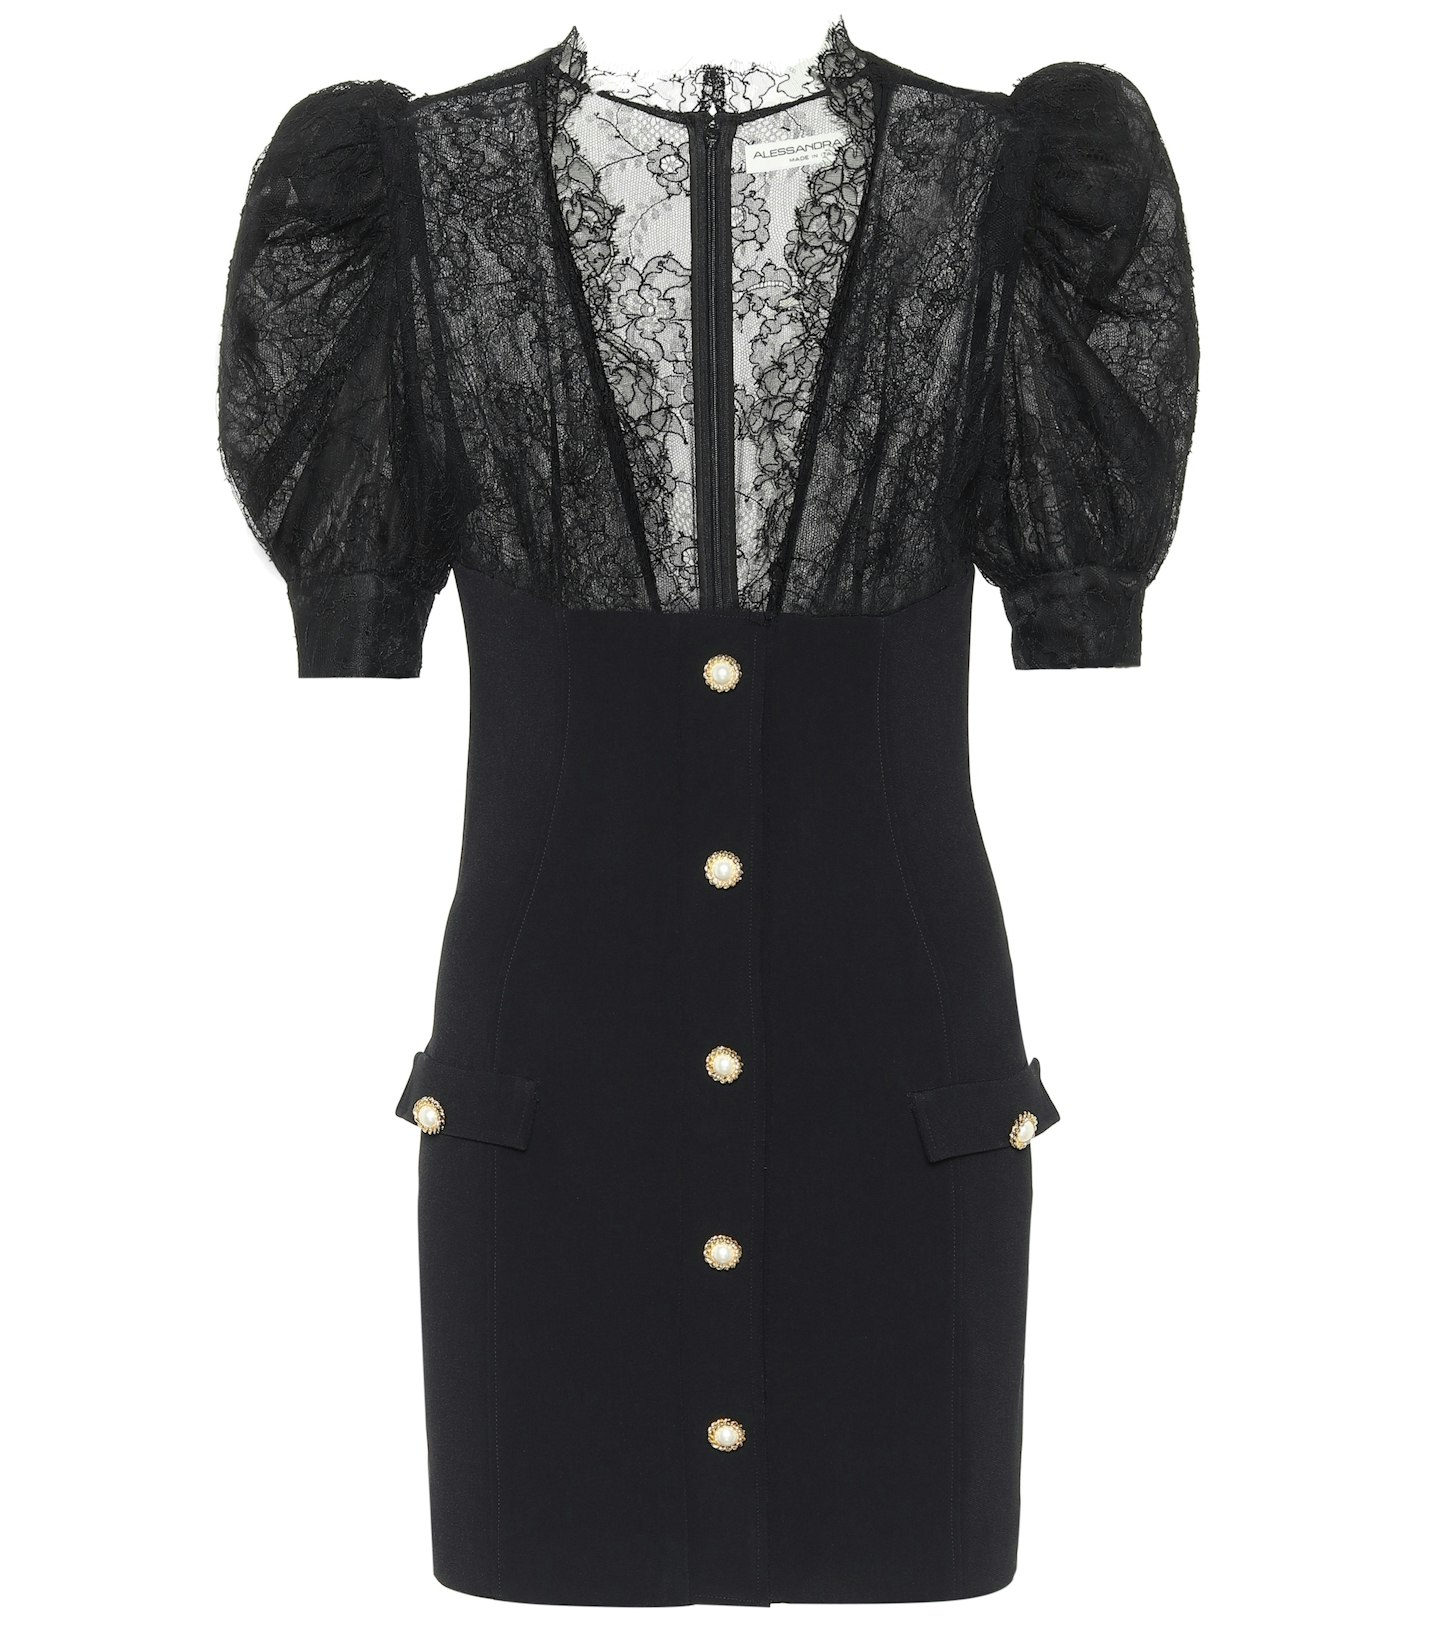 Alessandra Rich, Lace-Trimmed Crepe Minidress, £1,515